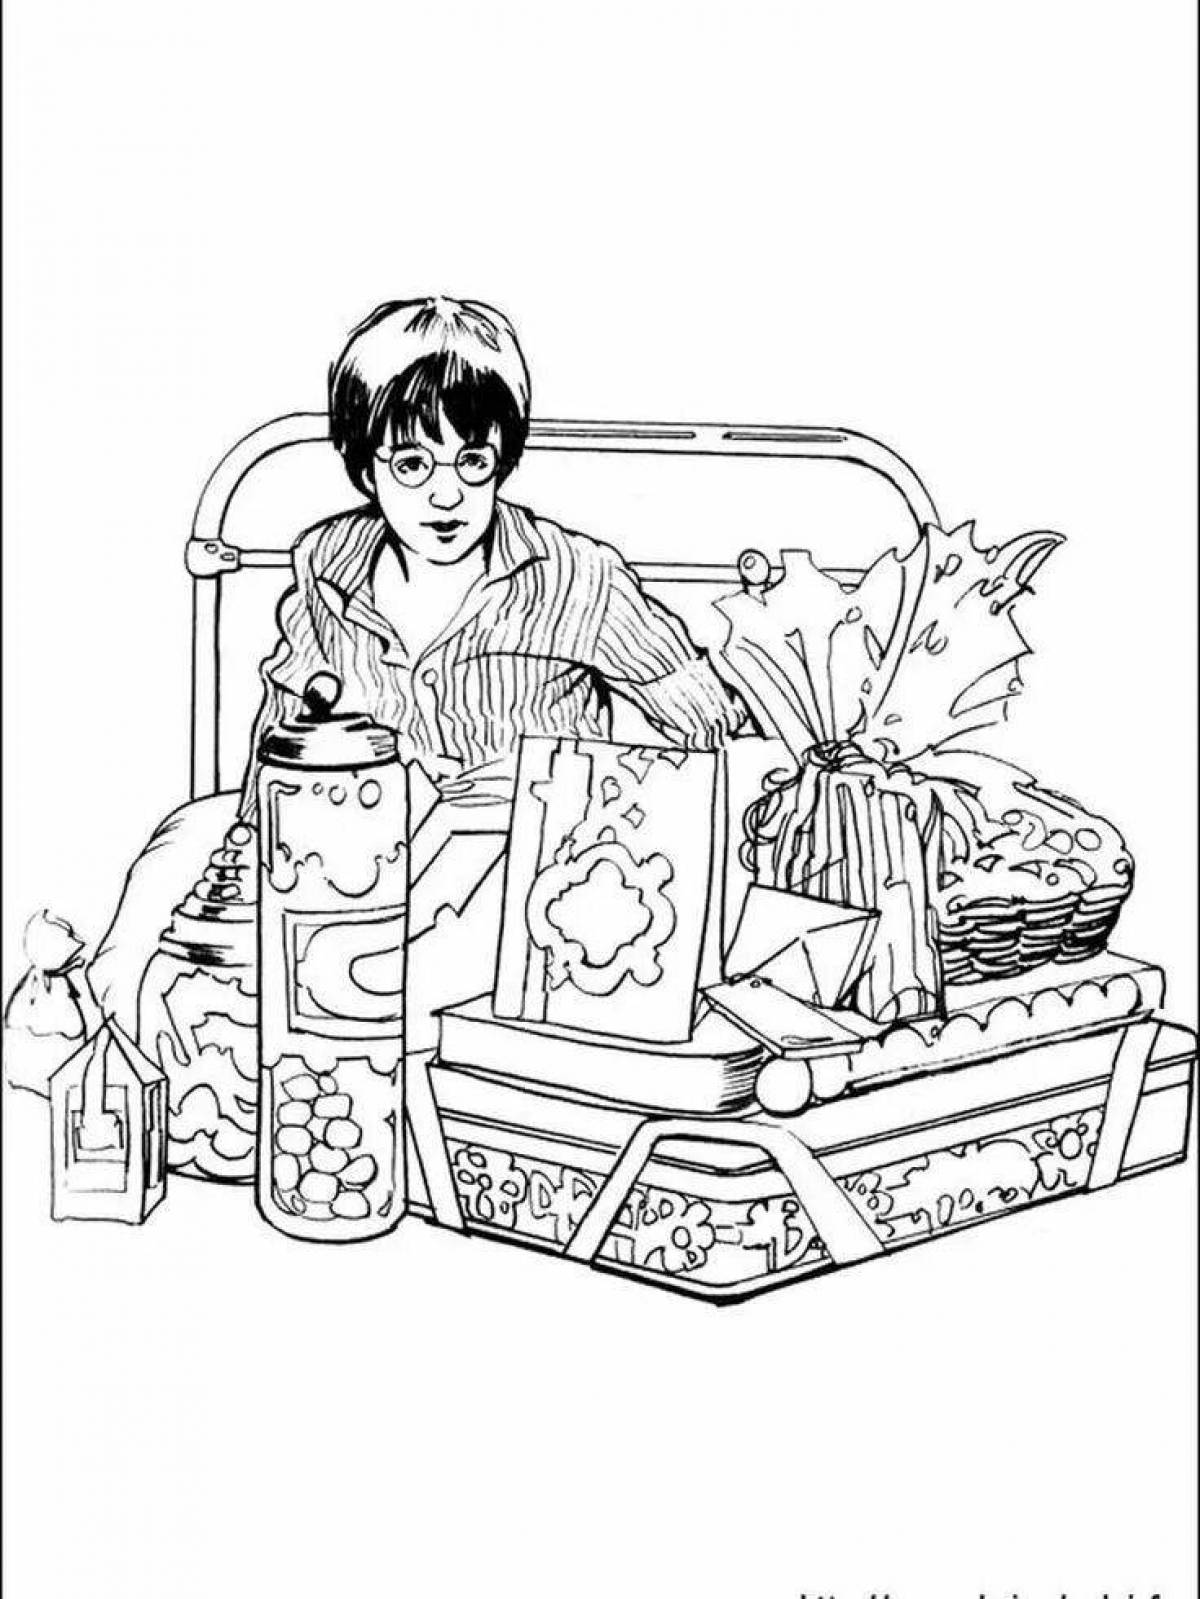 Harry Potter and the Philosopher's Stone awesome coloring book